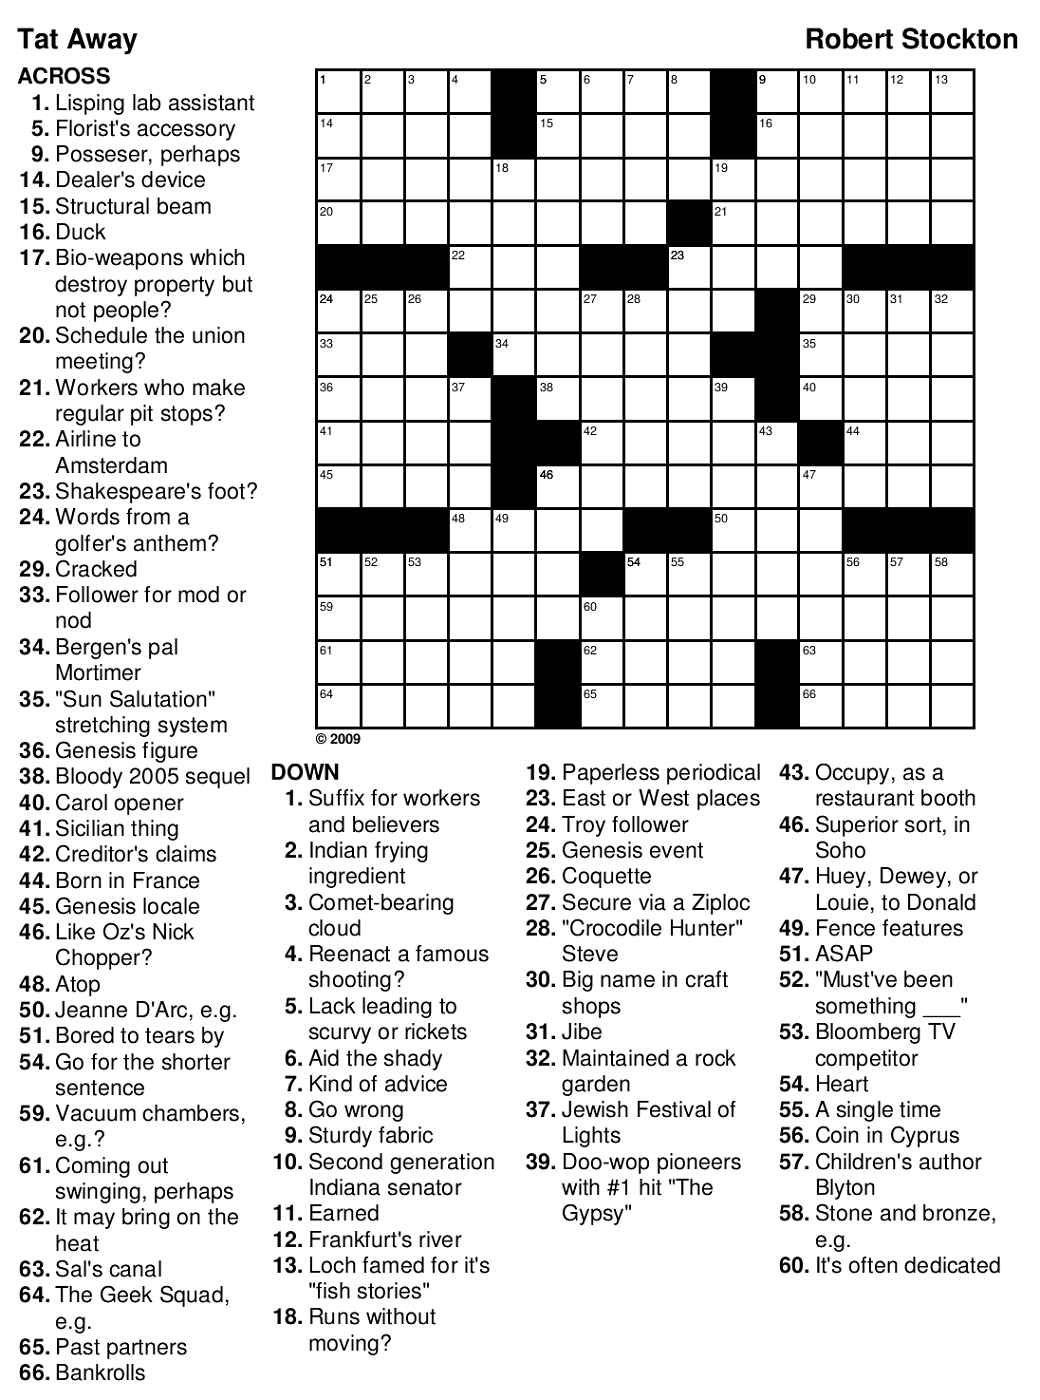 Free Crossword Puzzles Printable For Students